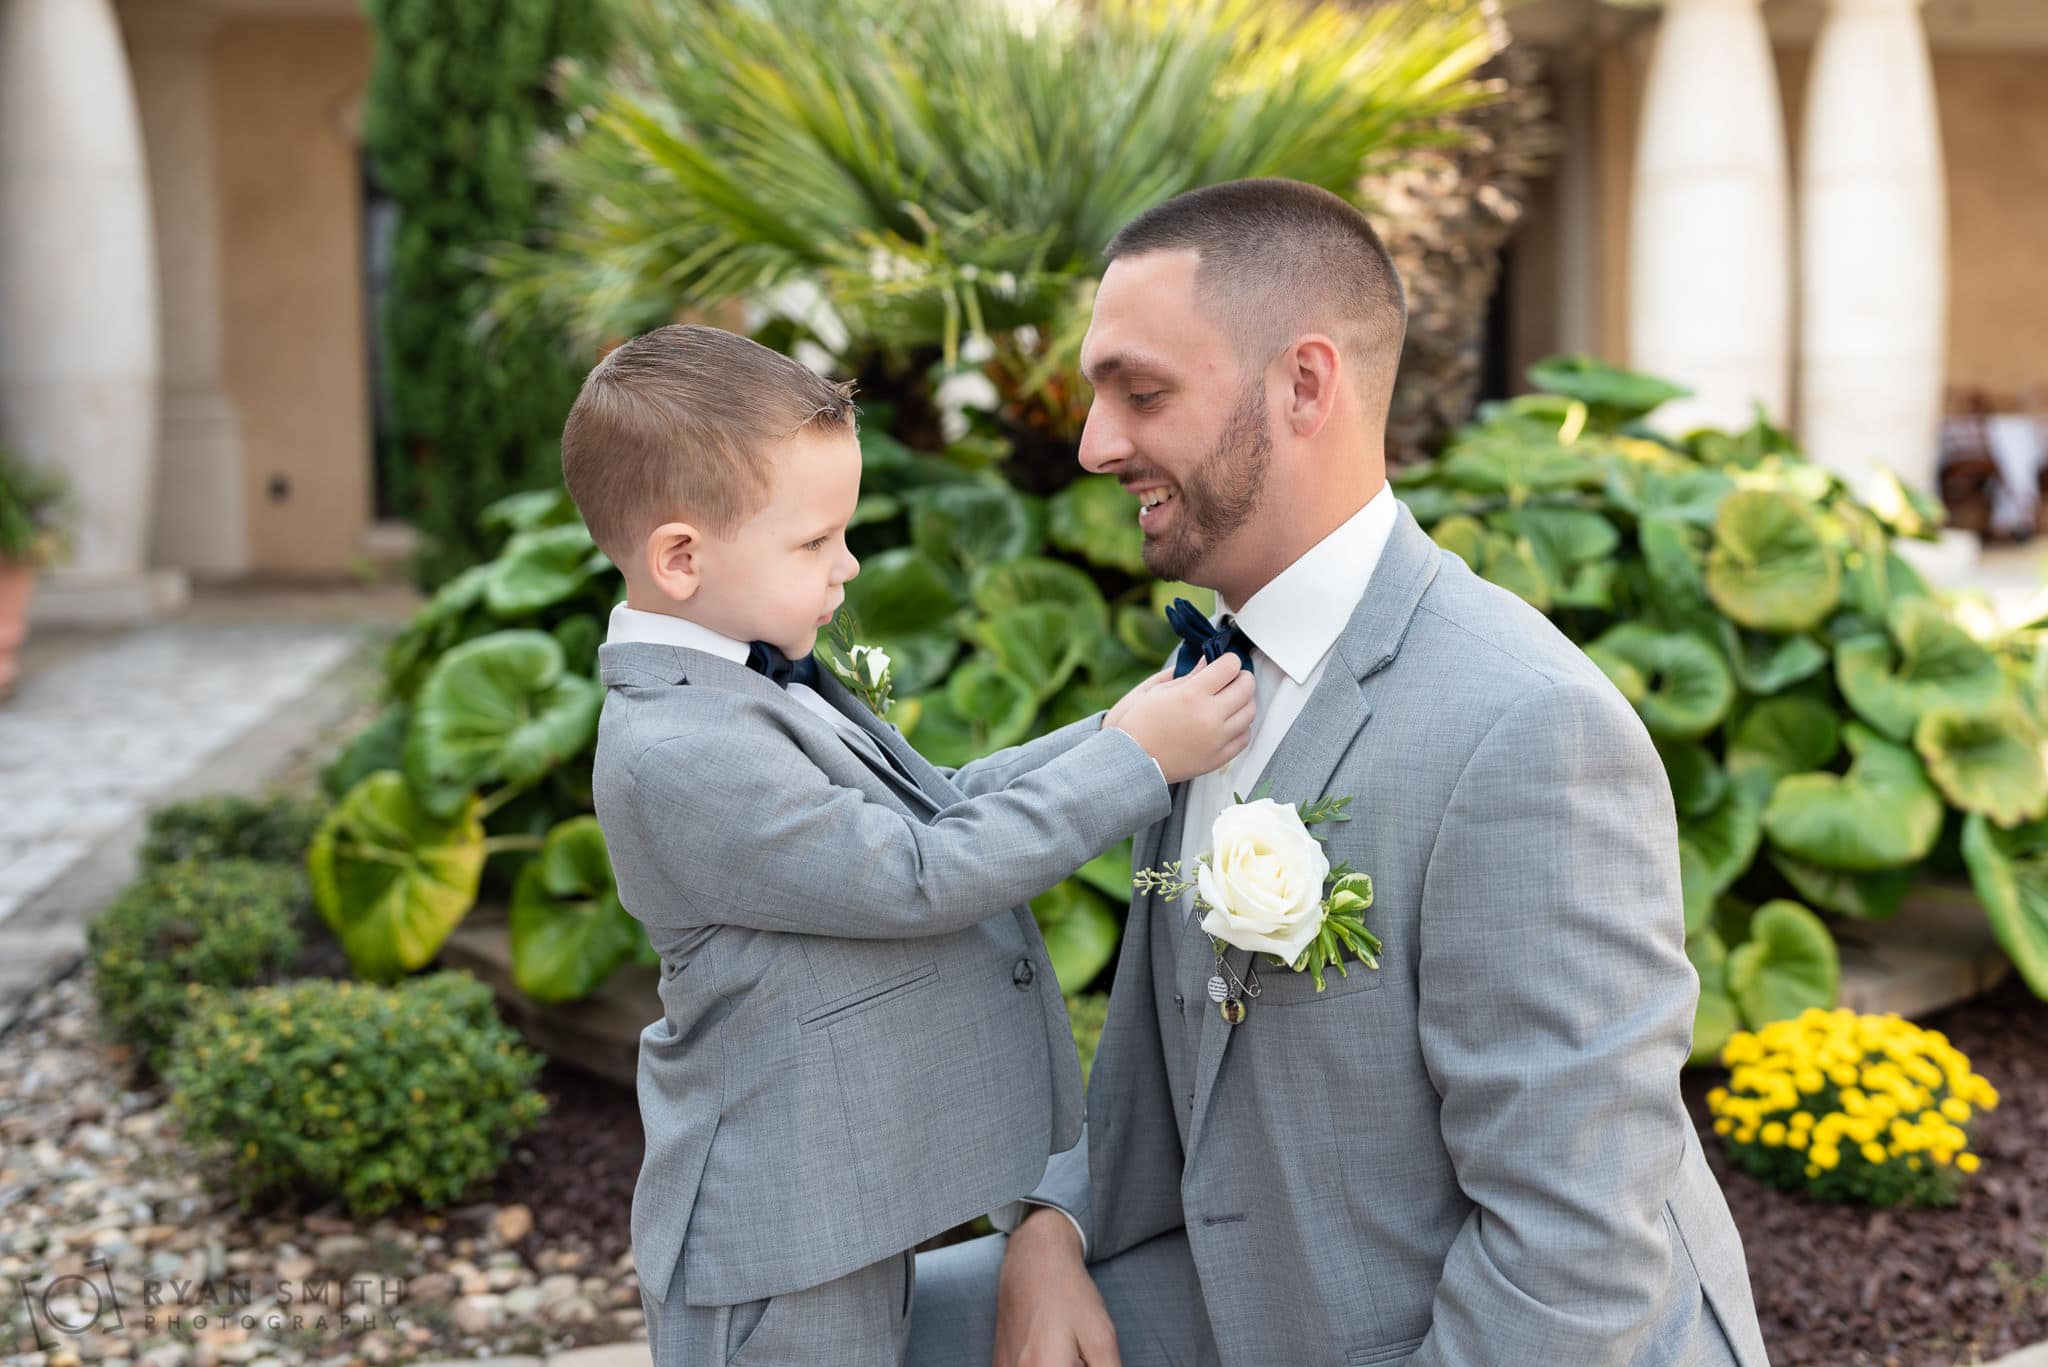 Ring bearer helping groom with his tie - 21 Main Events - North Myrtle Beach